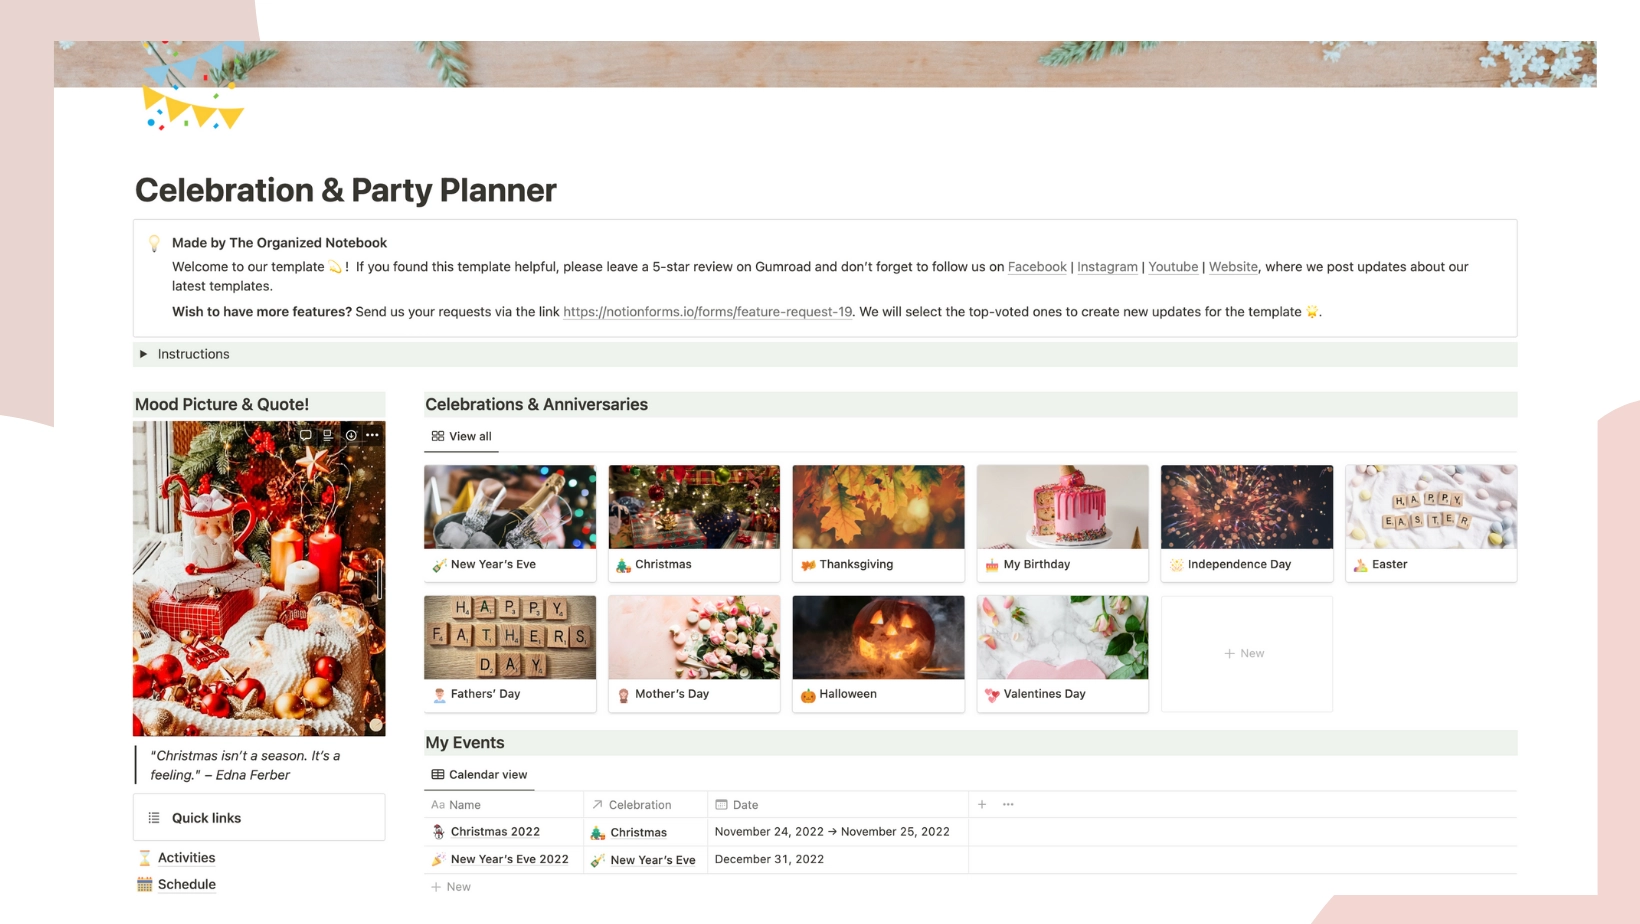 Celebration & Party Planner Notion Template